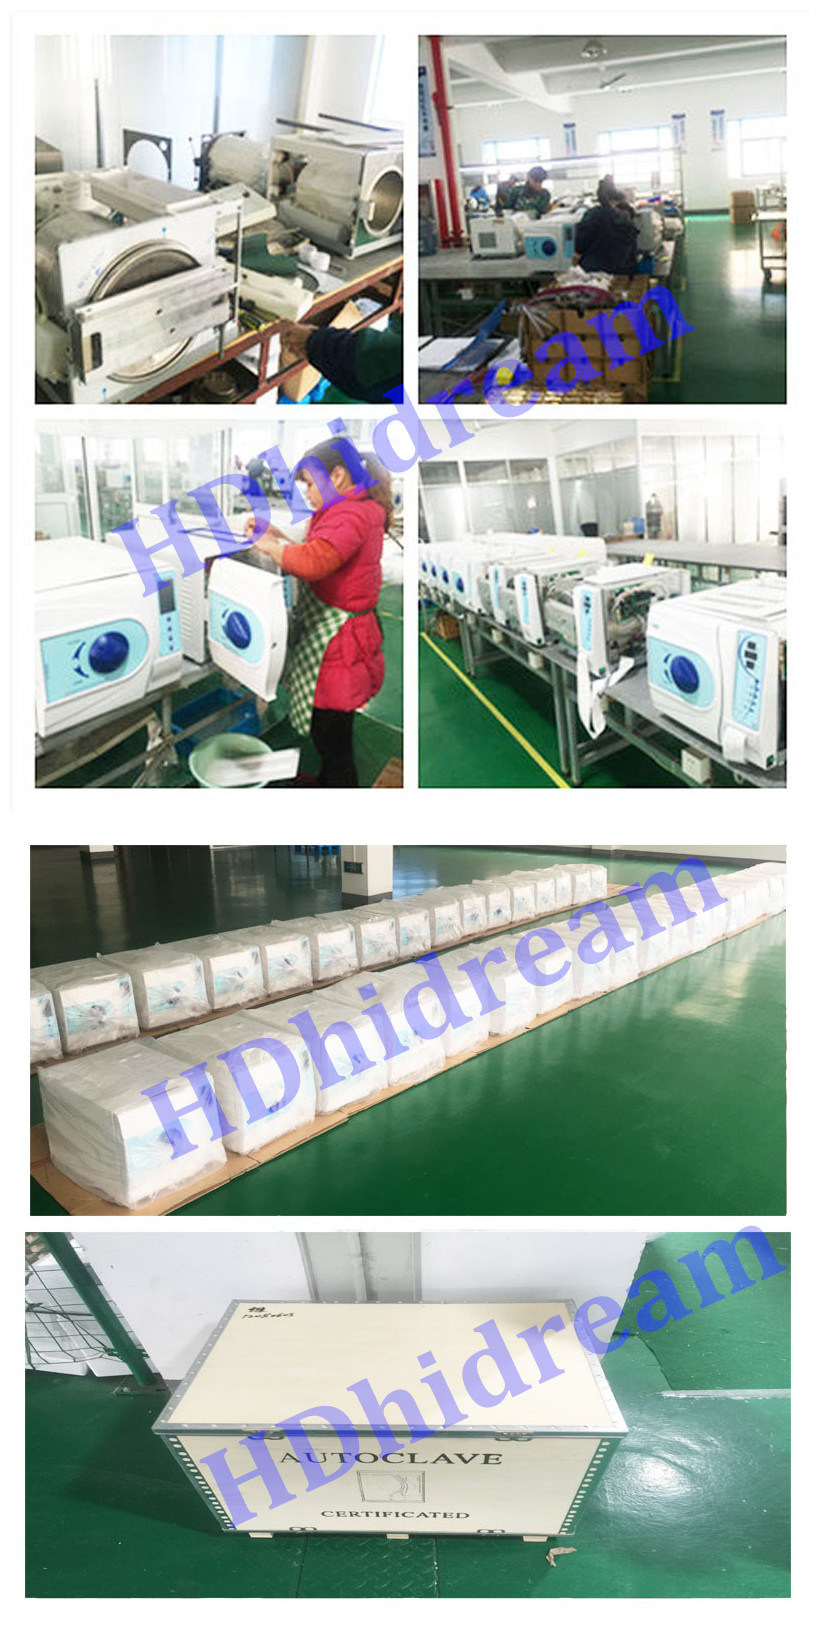 16L Class B LCD Display Benchtop Steam China Automatic Autoclave Machine